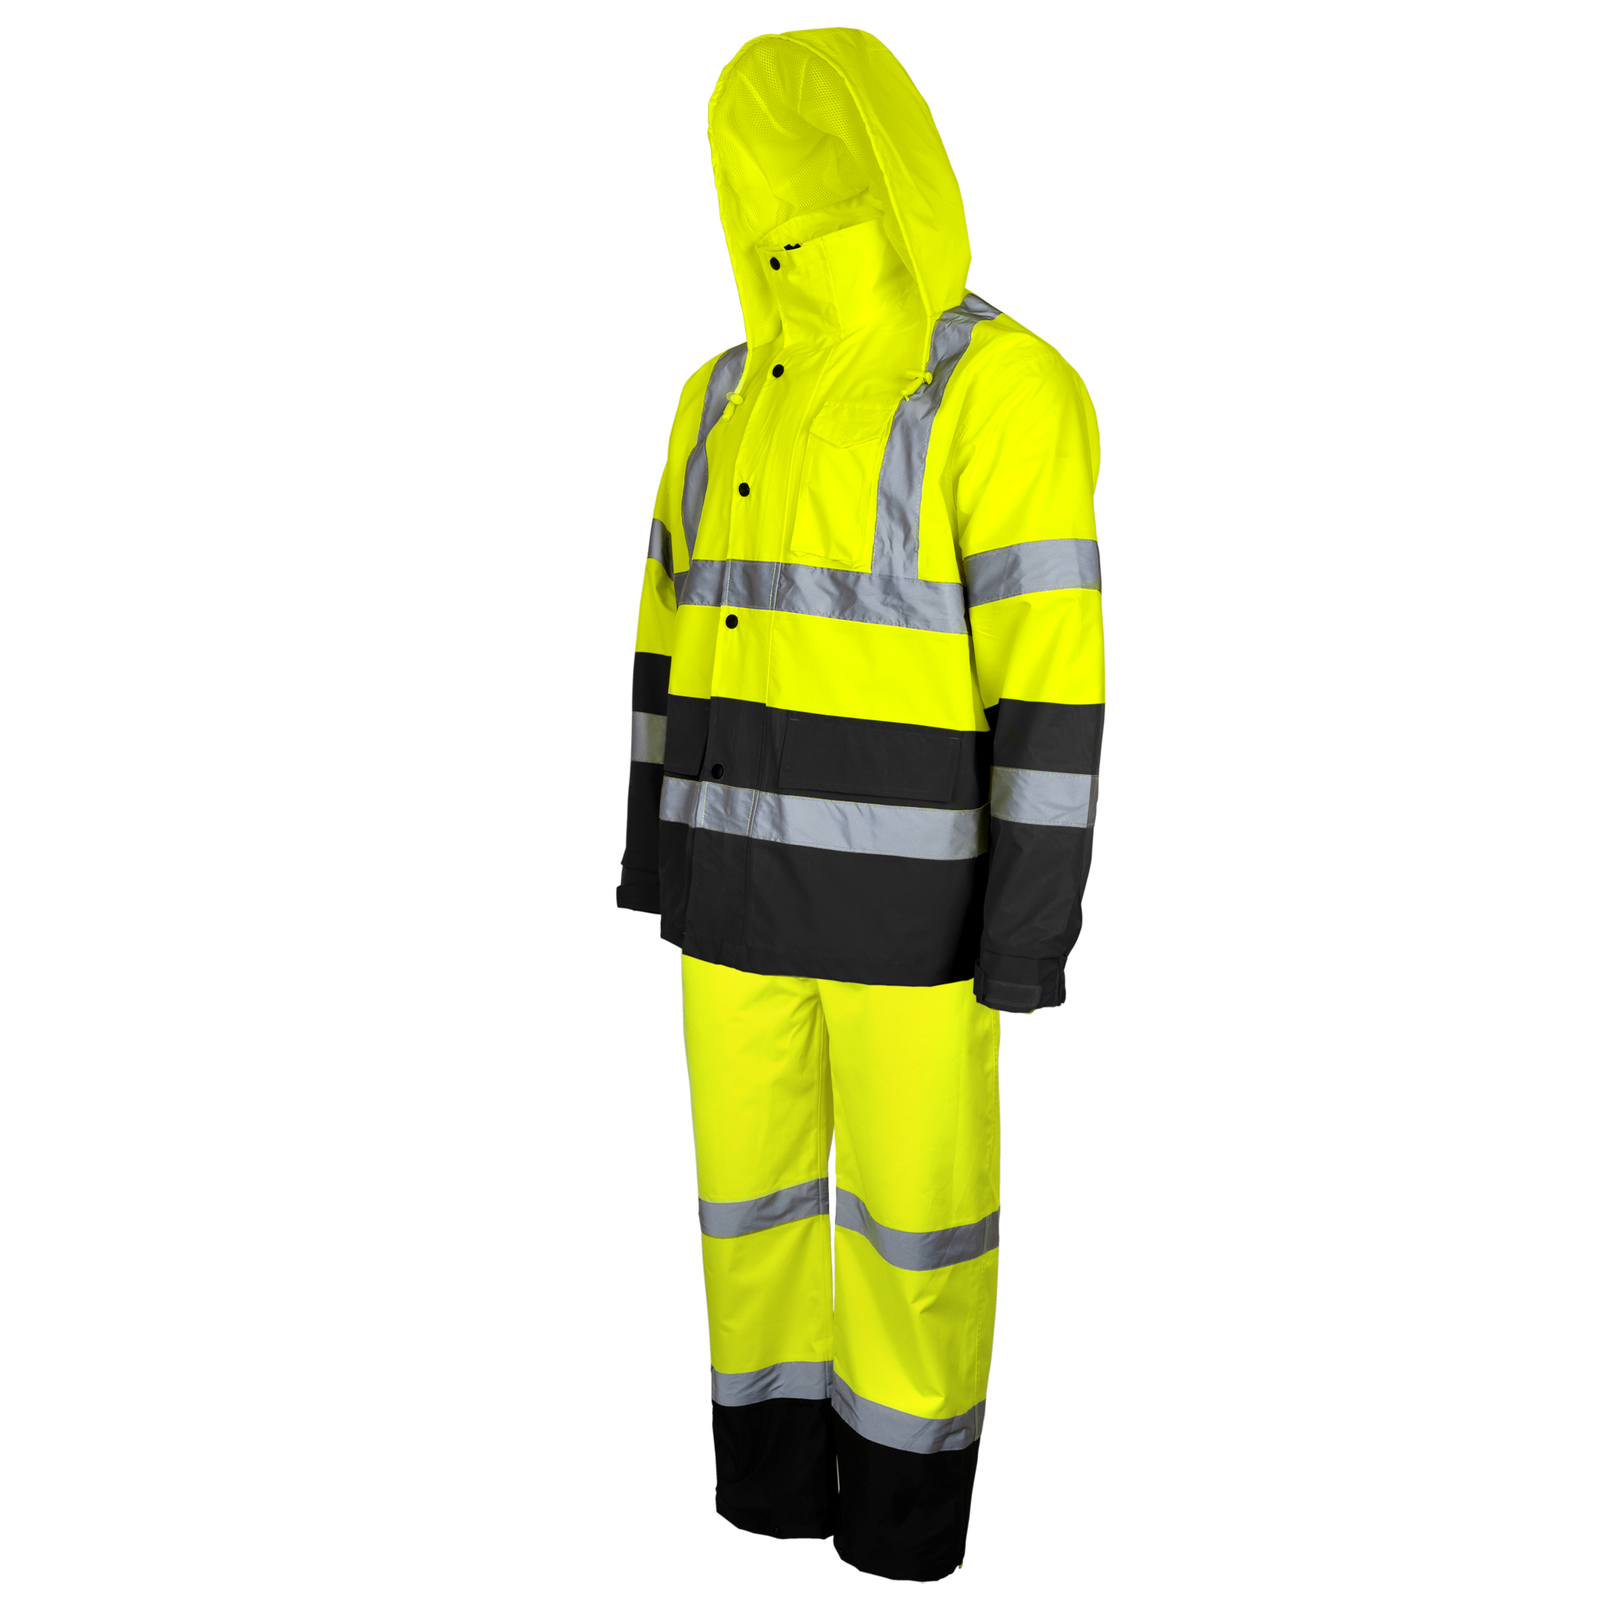 HI- visibility waterproof safety rain set overall pants and jacket with reflective strips